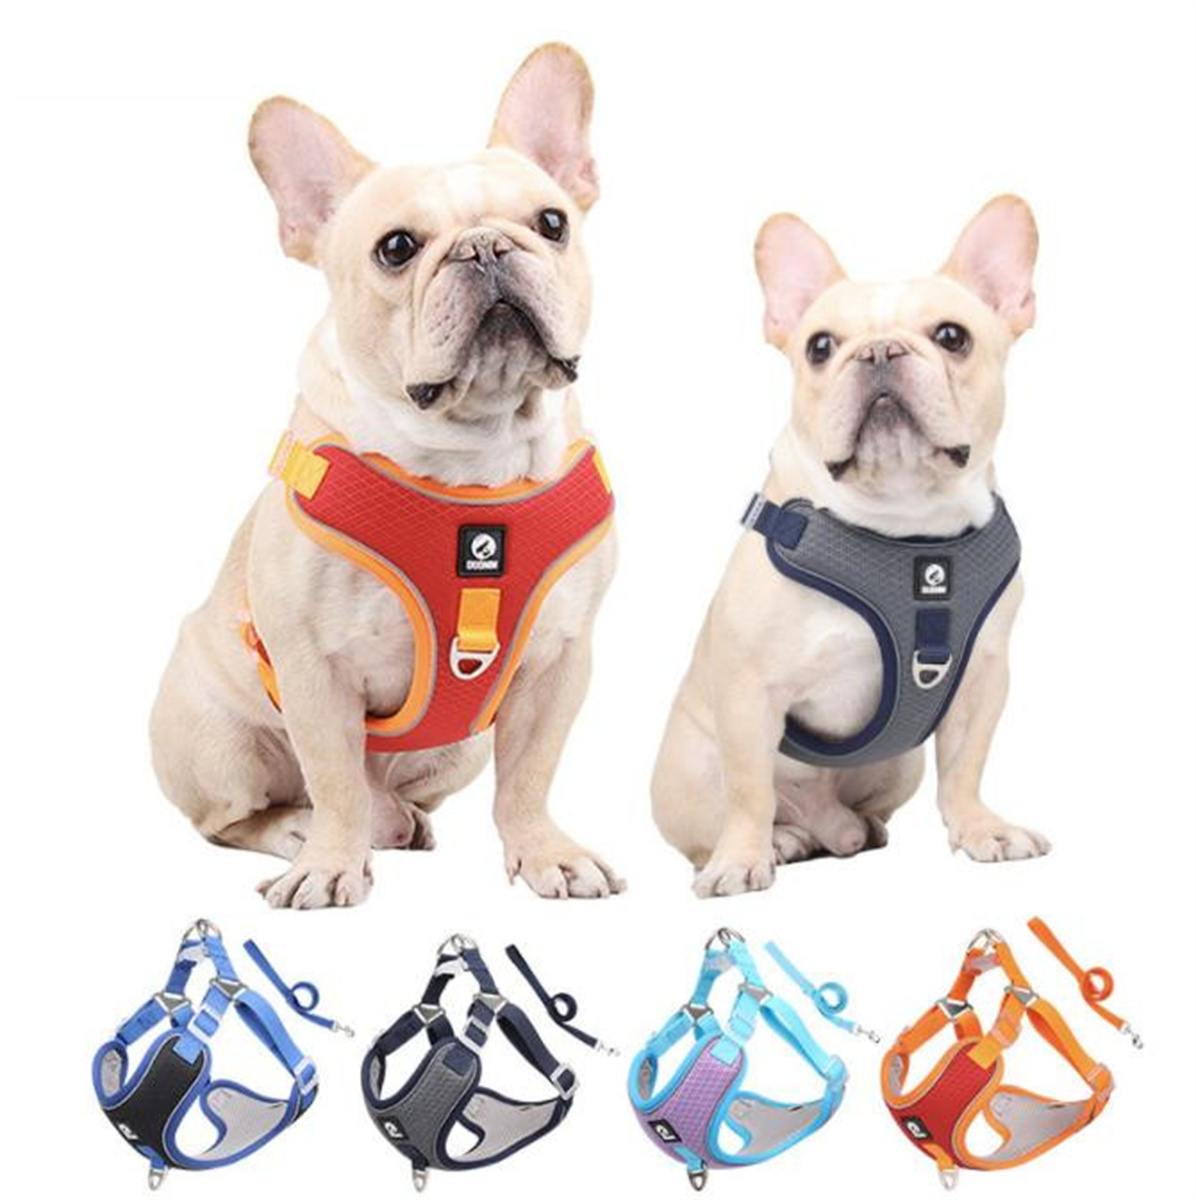 New pet chest strap vest type pet harnesses with leash mesh cloth reflective dog harness